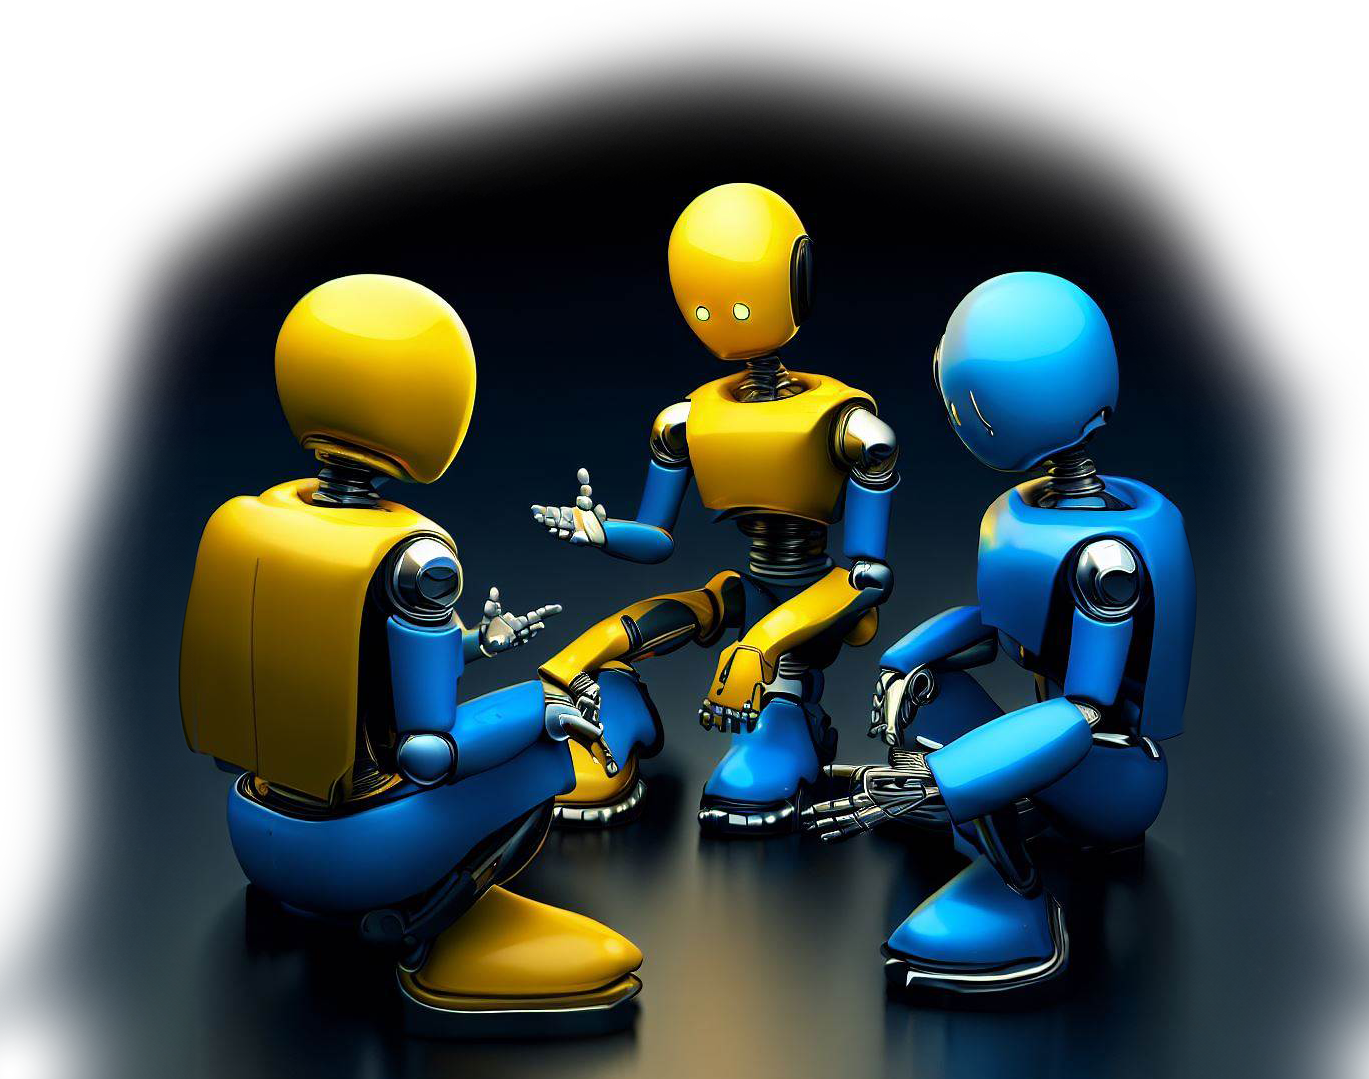 Background Image of 3 robots discussing